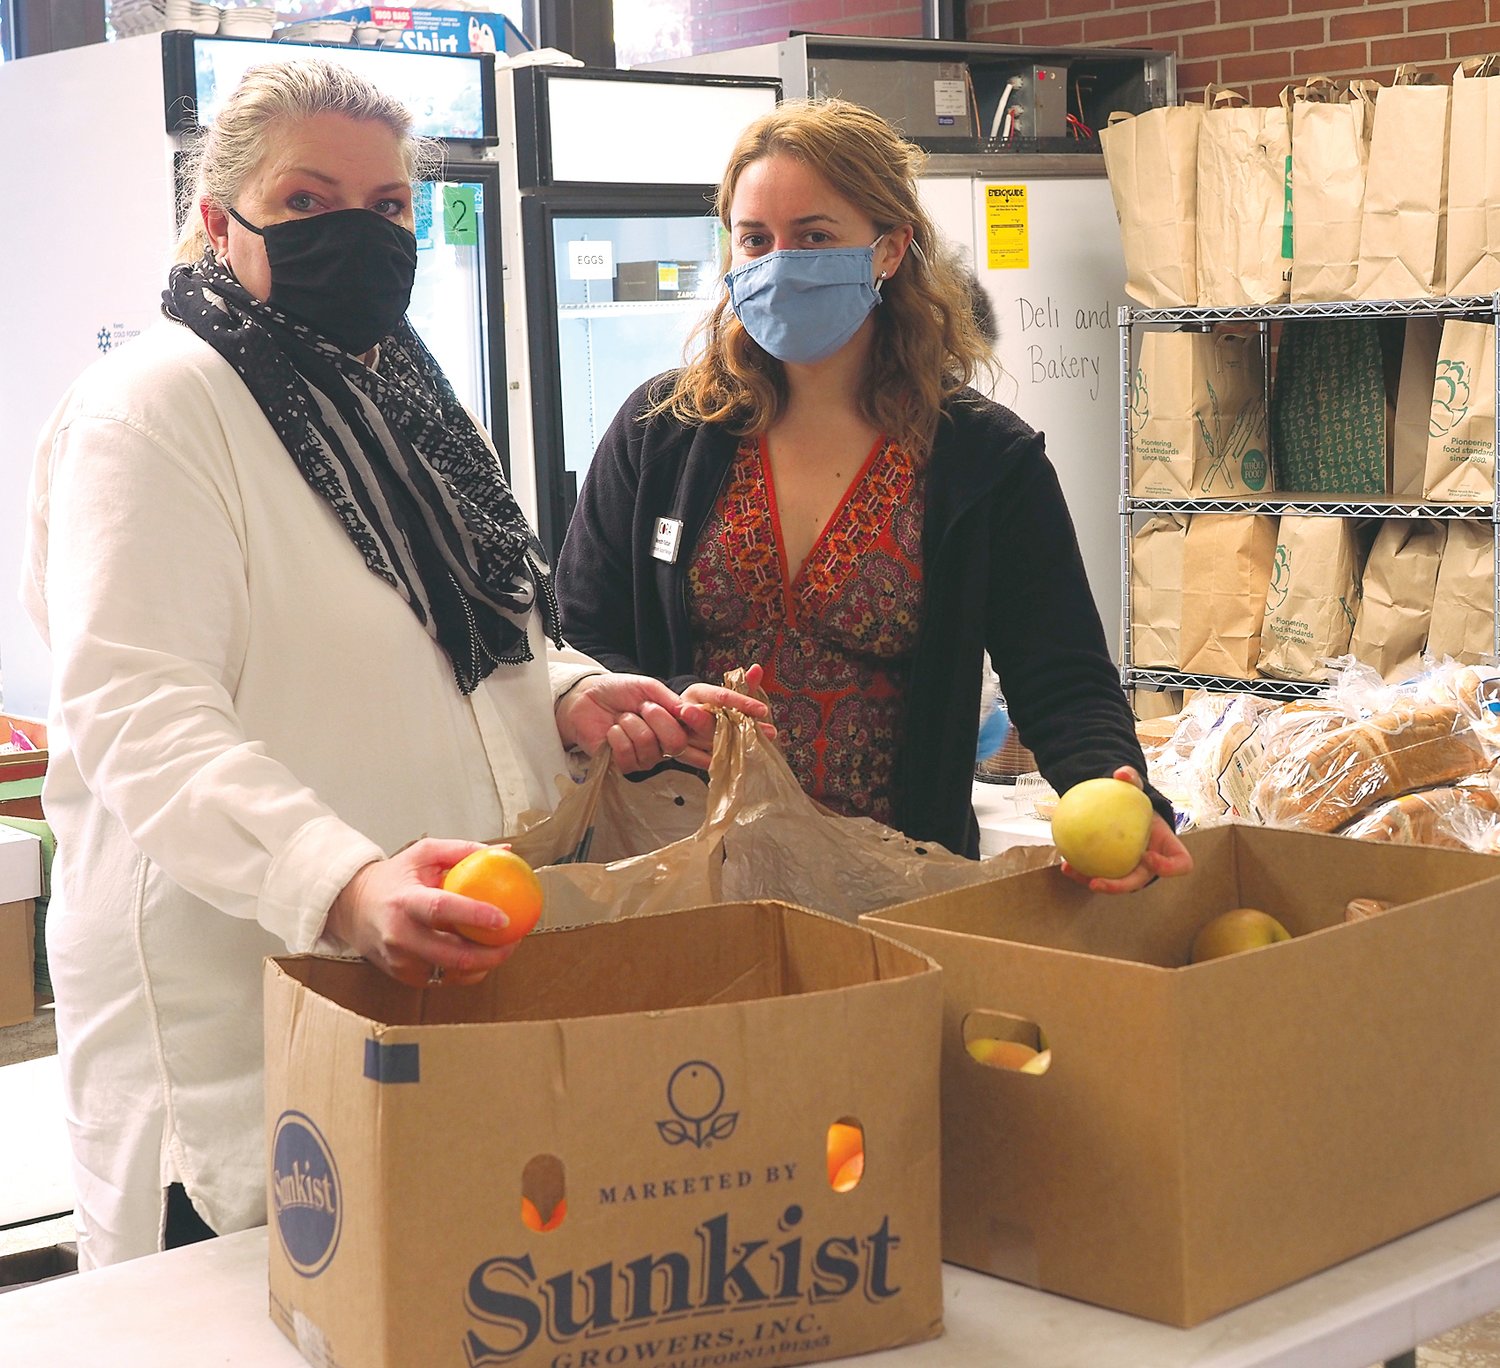 CORA Executive Director Melissa Driver Beard (left) and Community Support Manager Meredith Katibah sort fruits to be distributed to families in need of food.